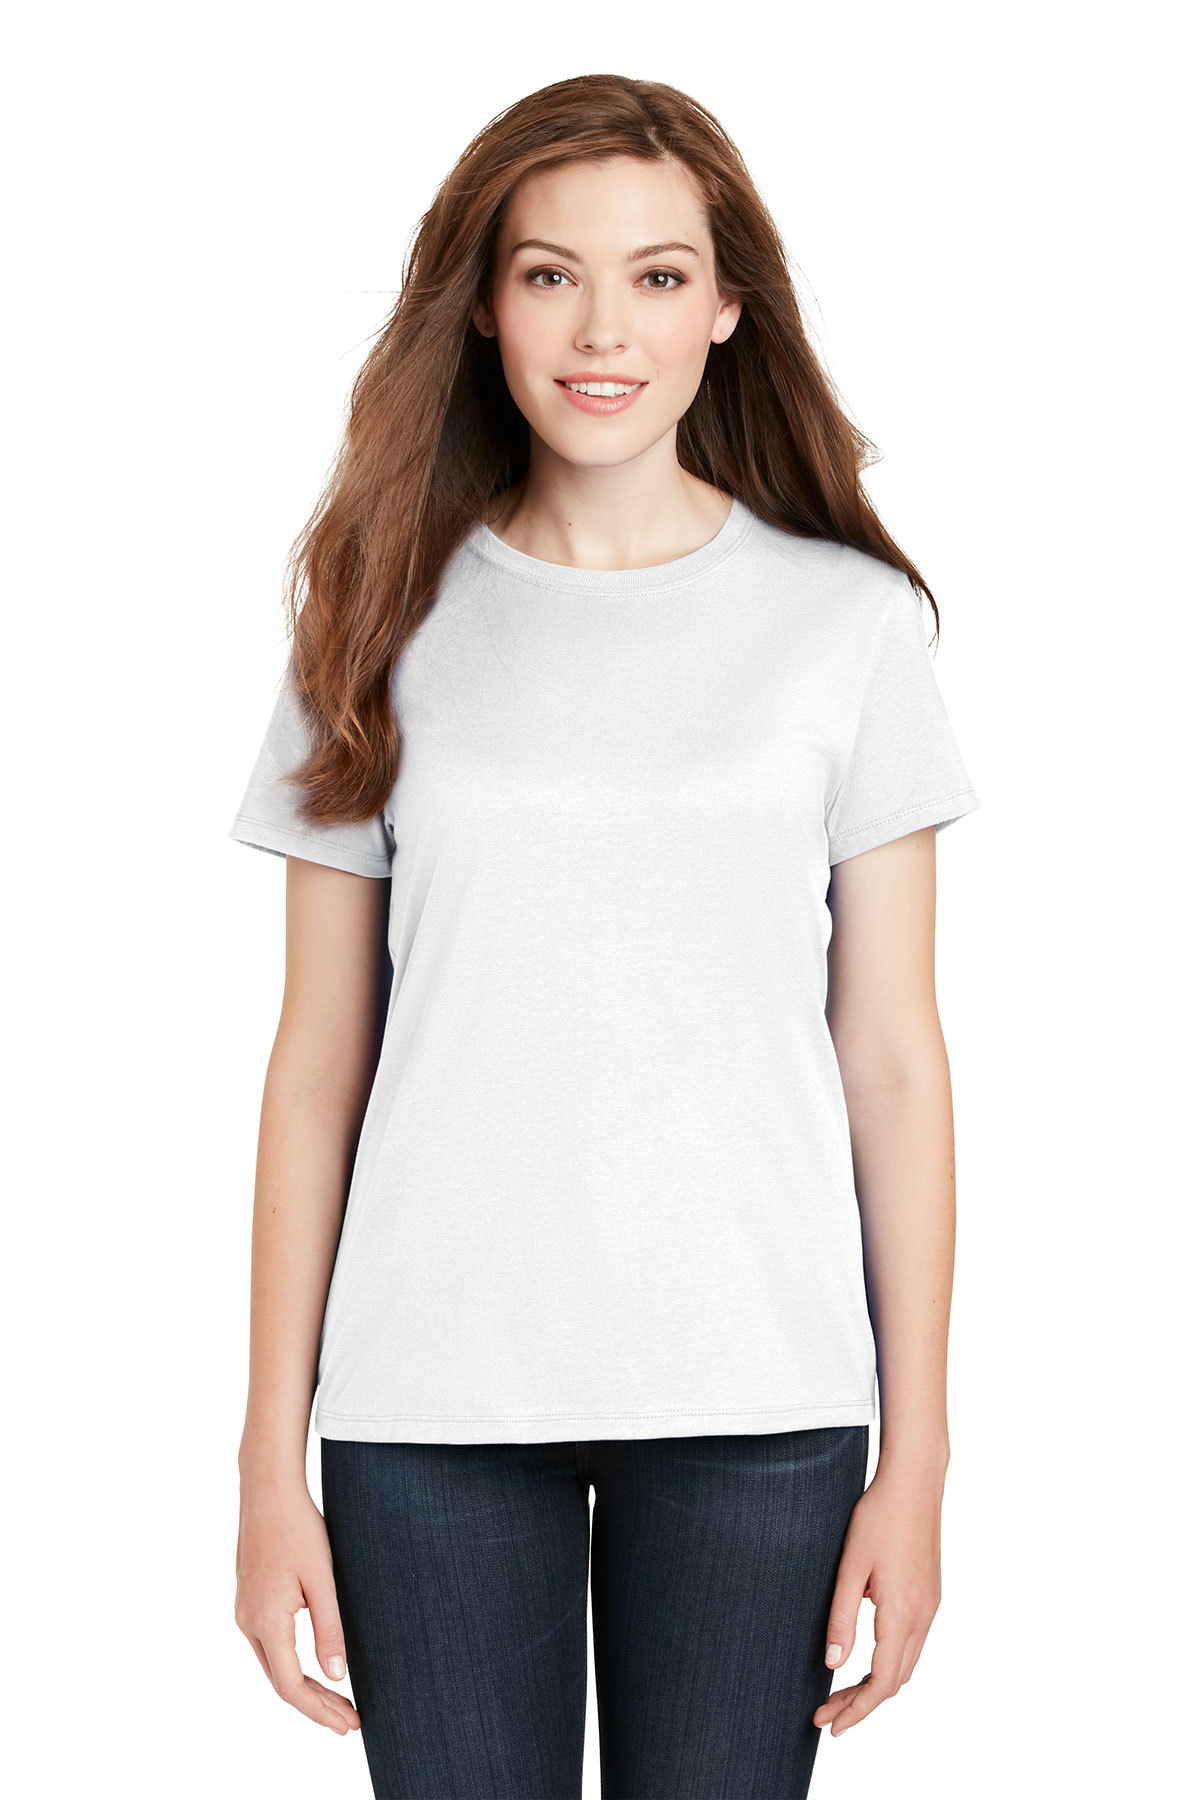 Hanes - Ladies Perfect-T Cotton T-Shirt | Product | Company Casuals